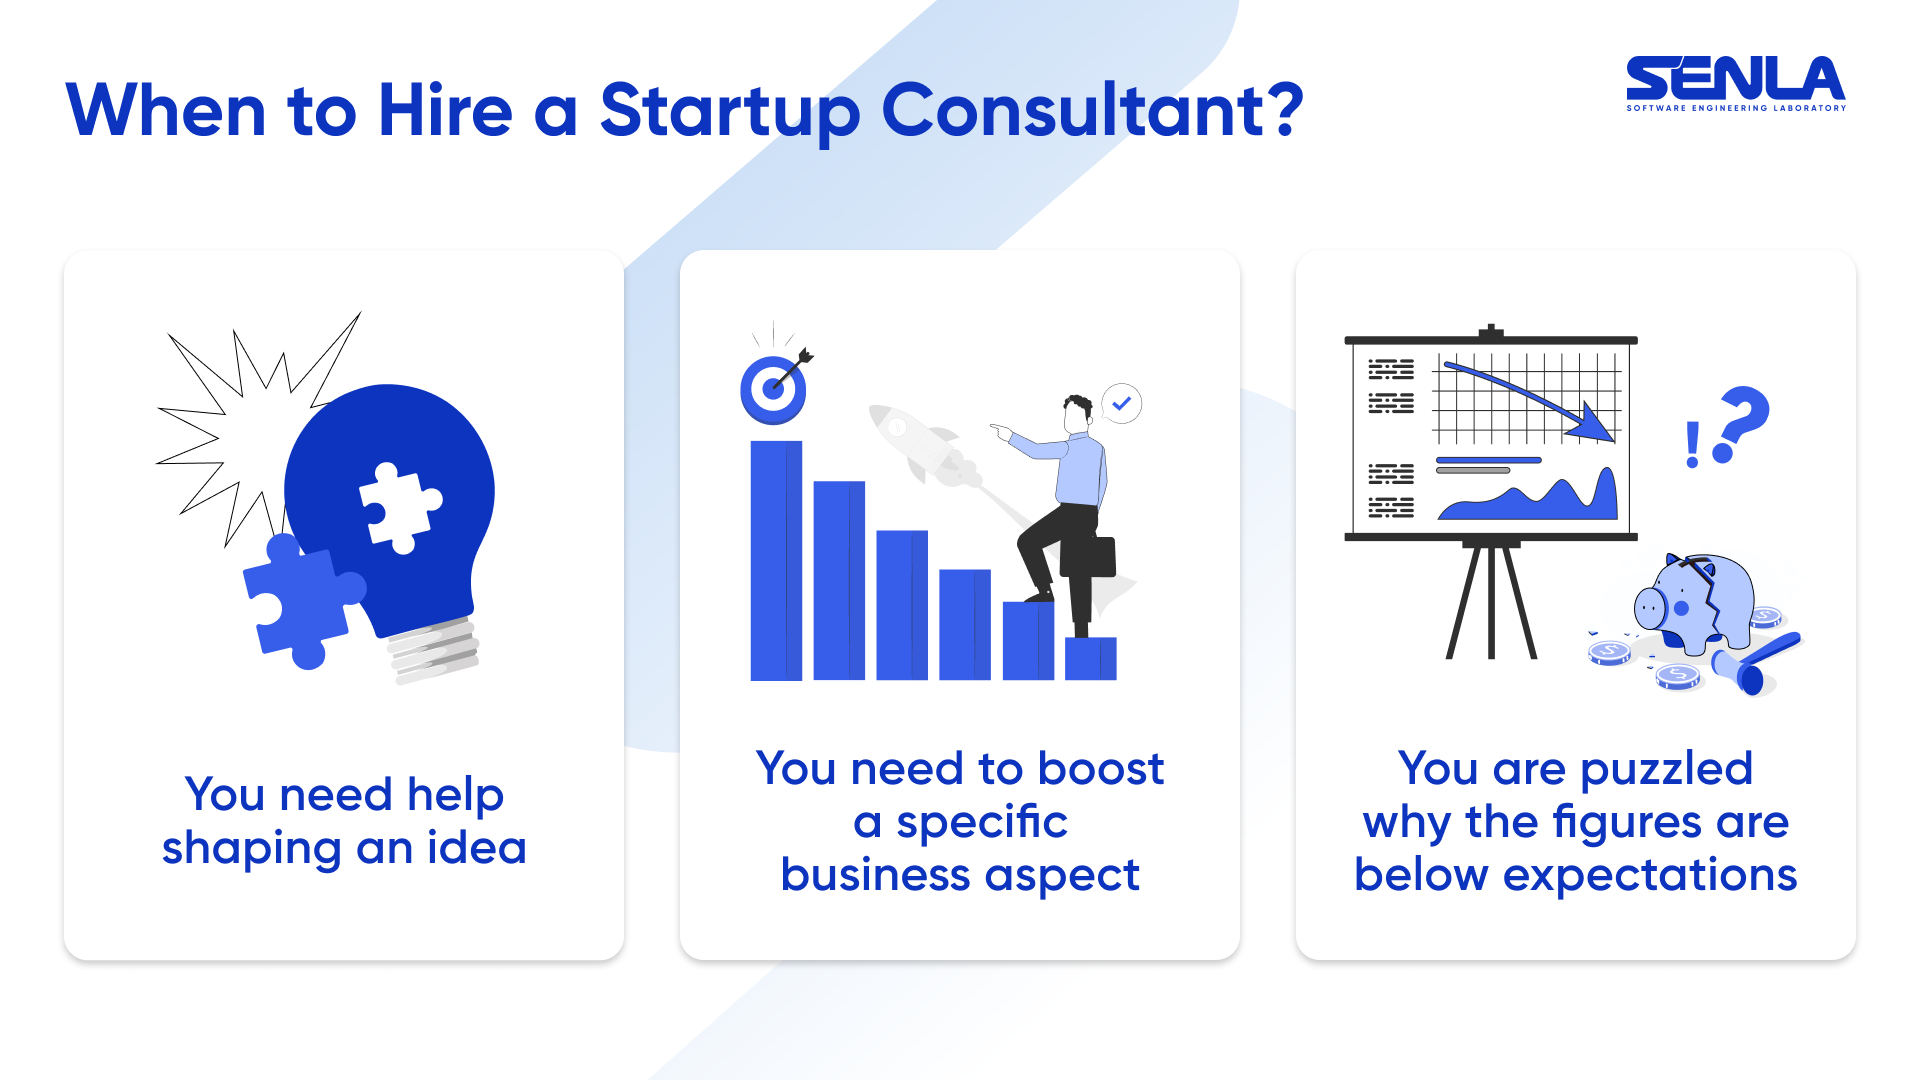 When to hire a startup consultant